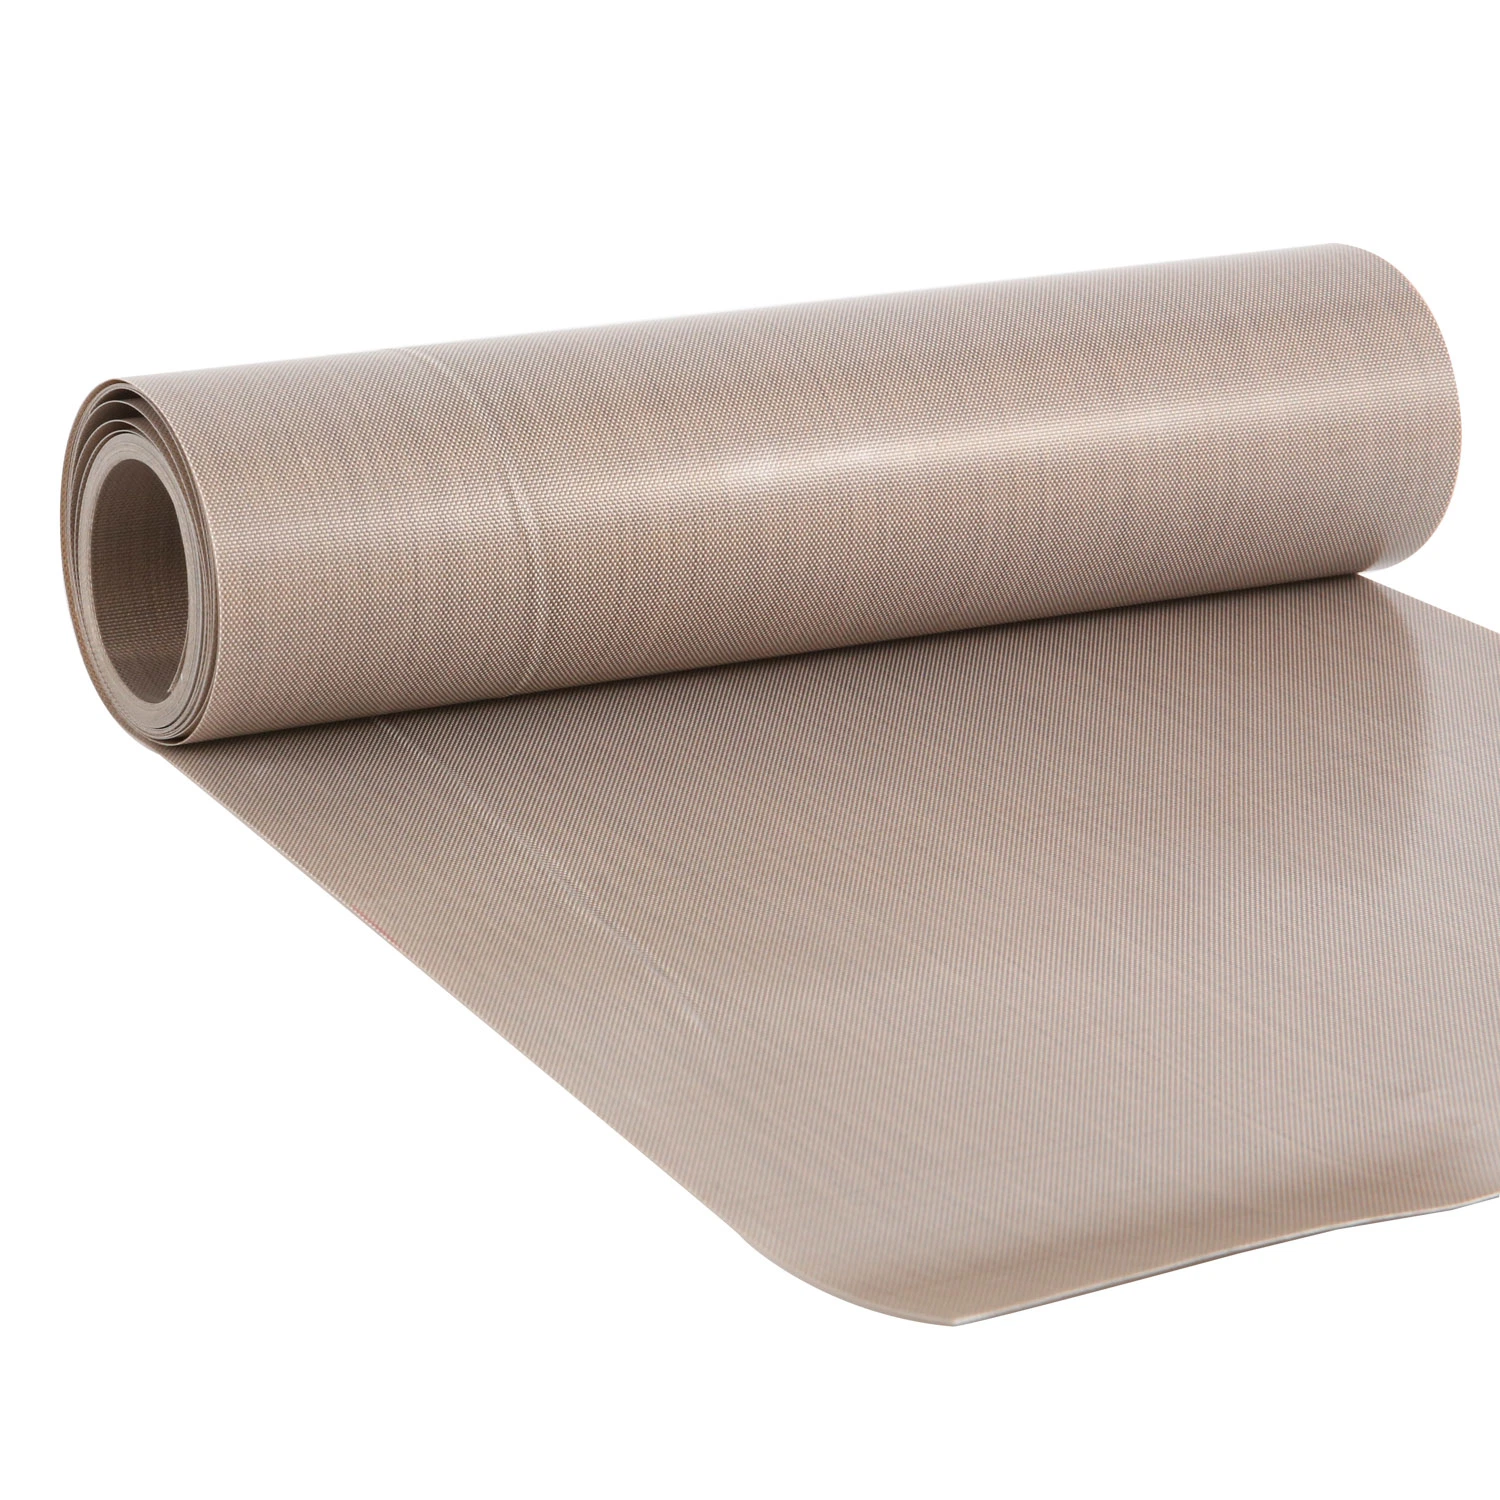 Wholesale/Supplier Best Quality 0.25mm PTFE Coated Fiberglass Laminated Machine Cover Cloth